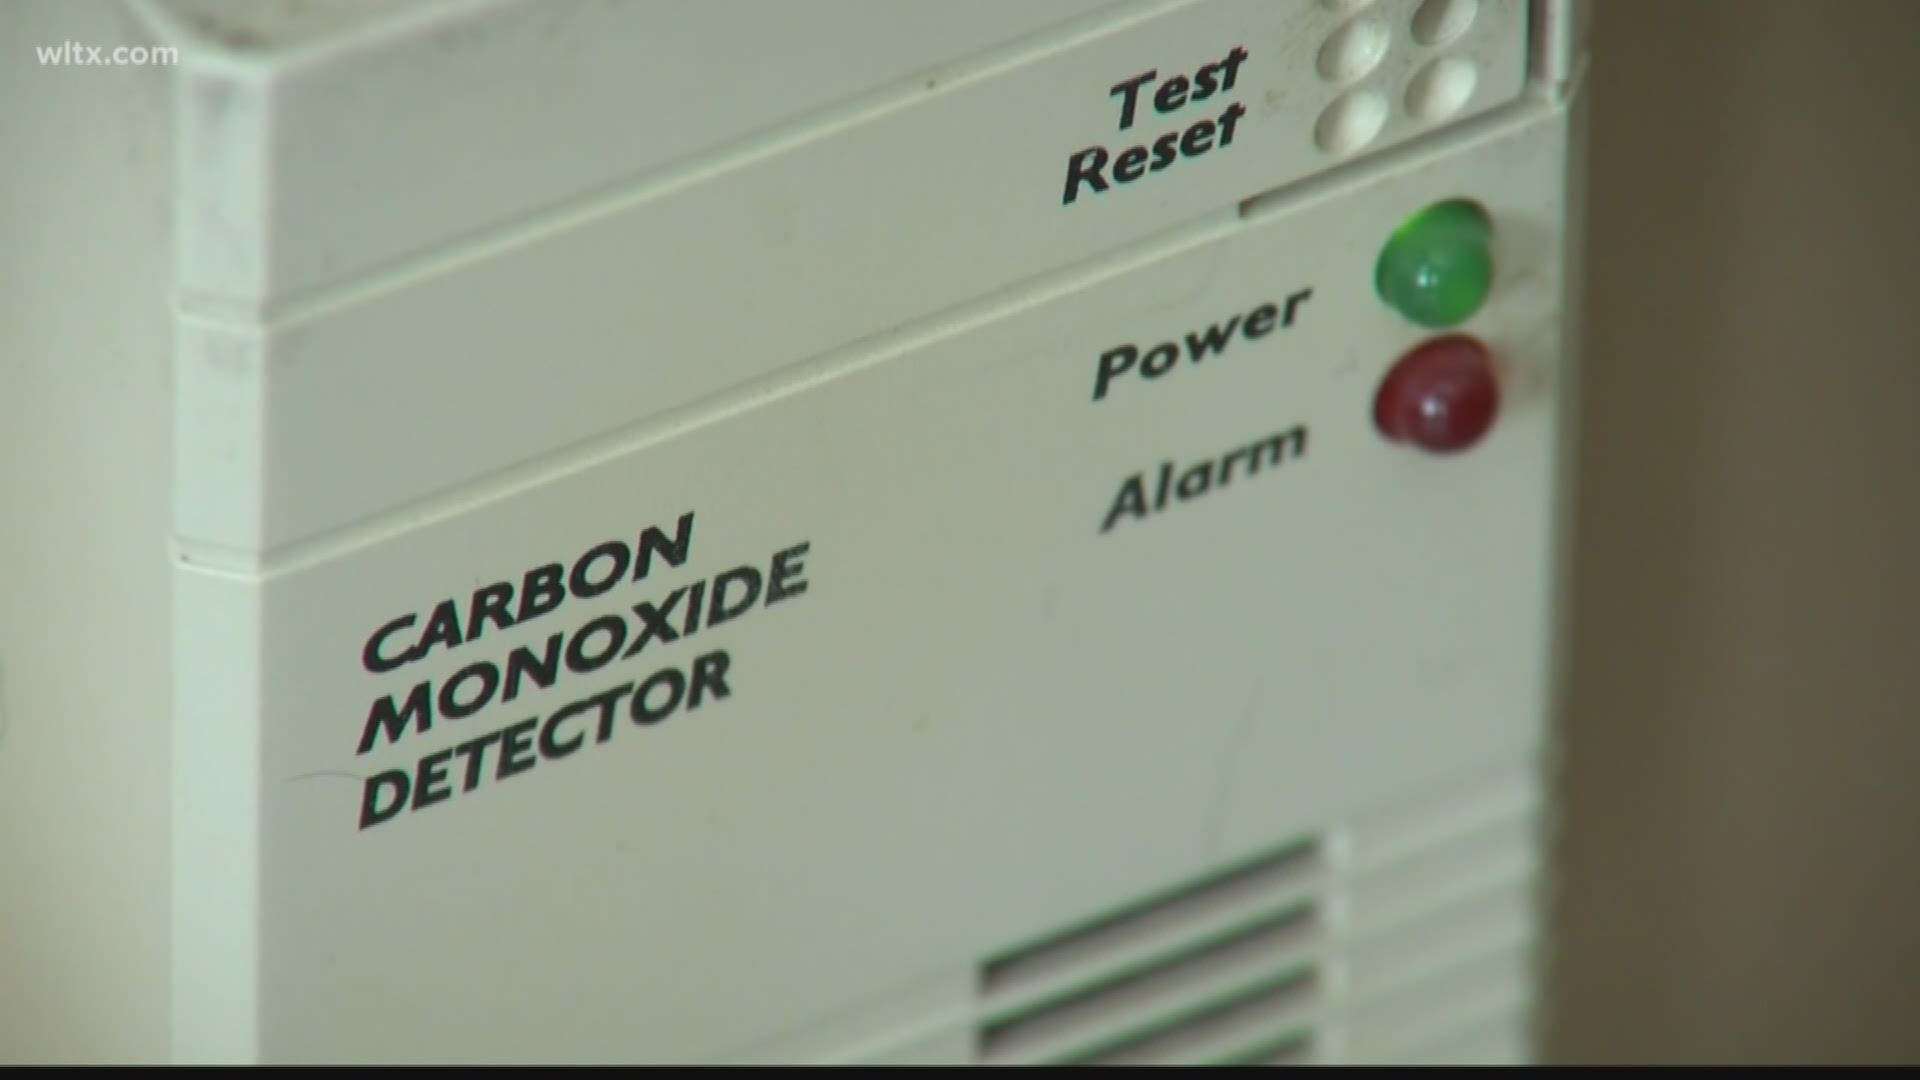 The bill would require a detector in every new home and recent remodels